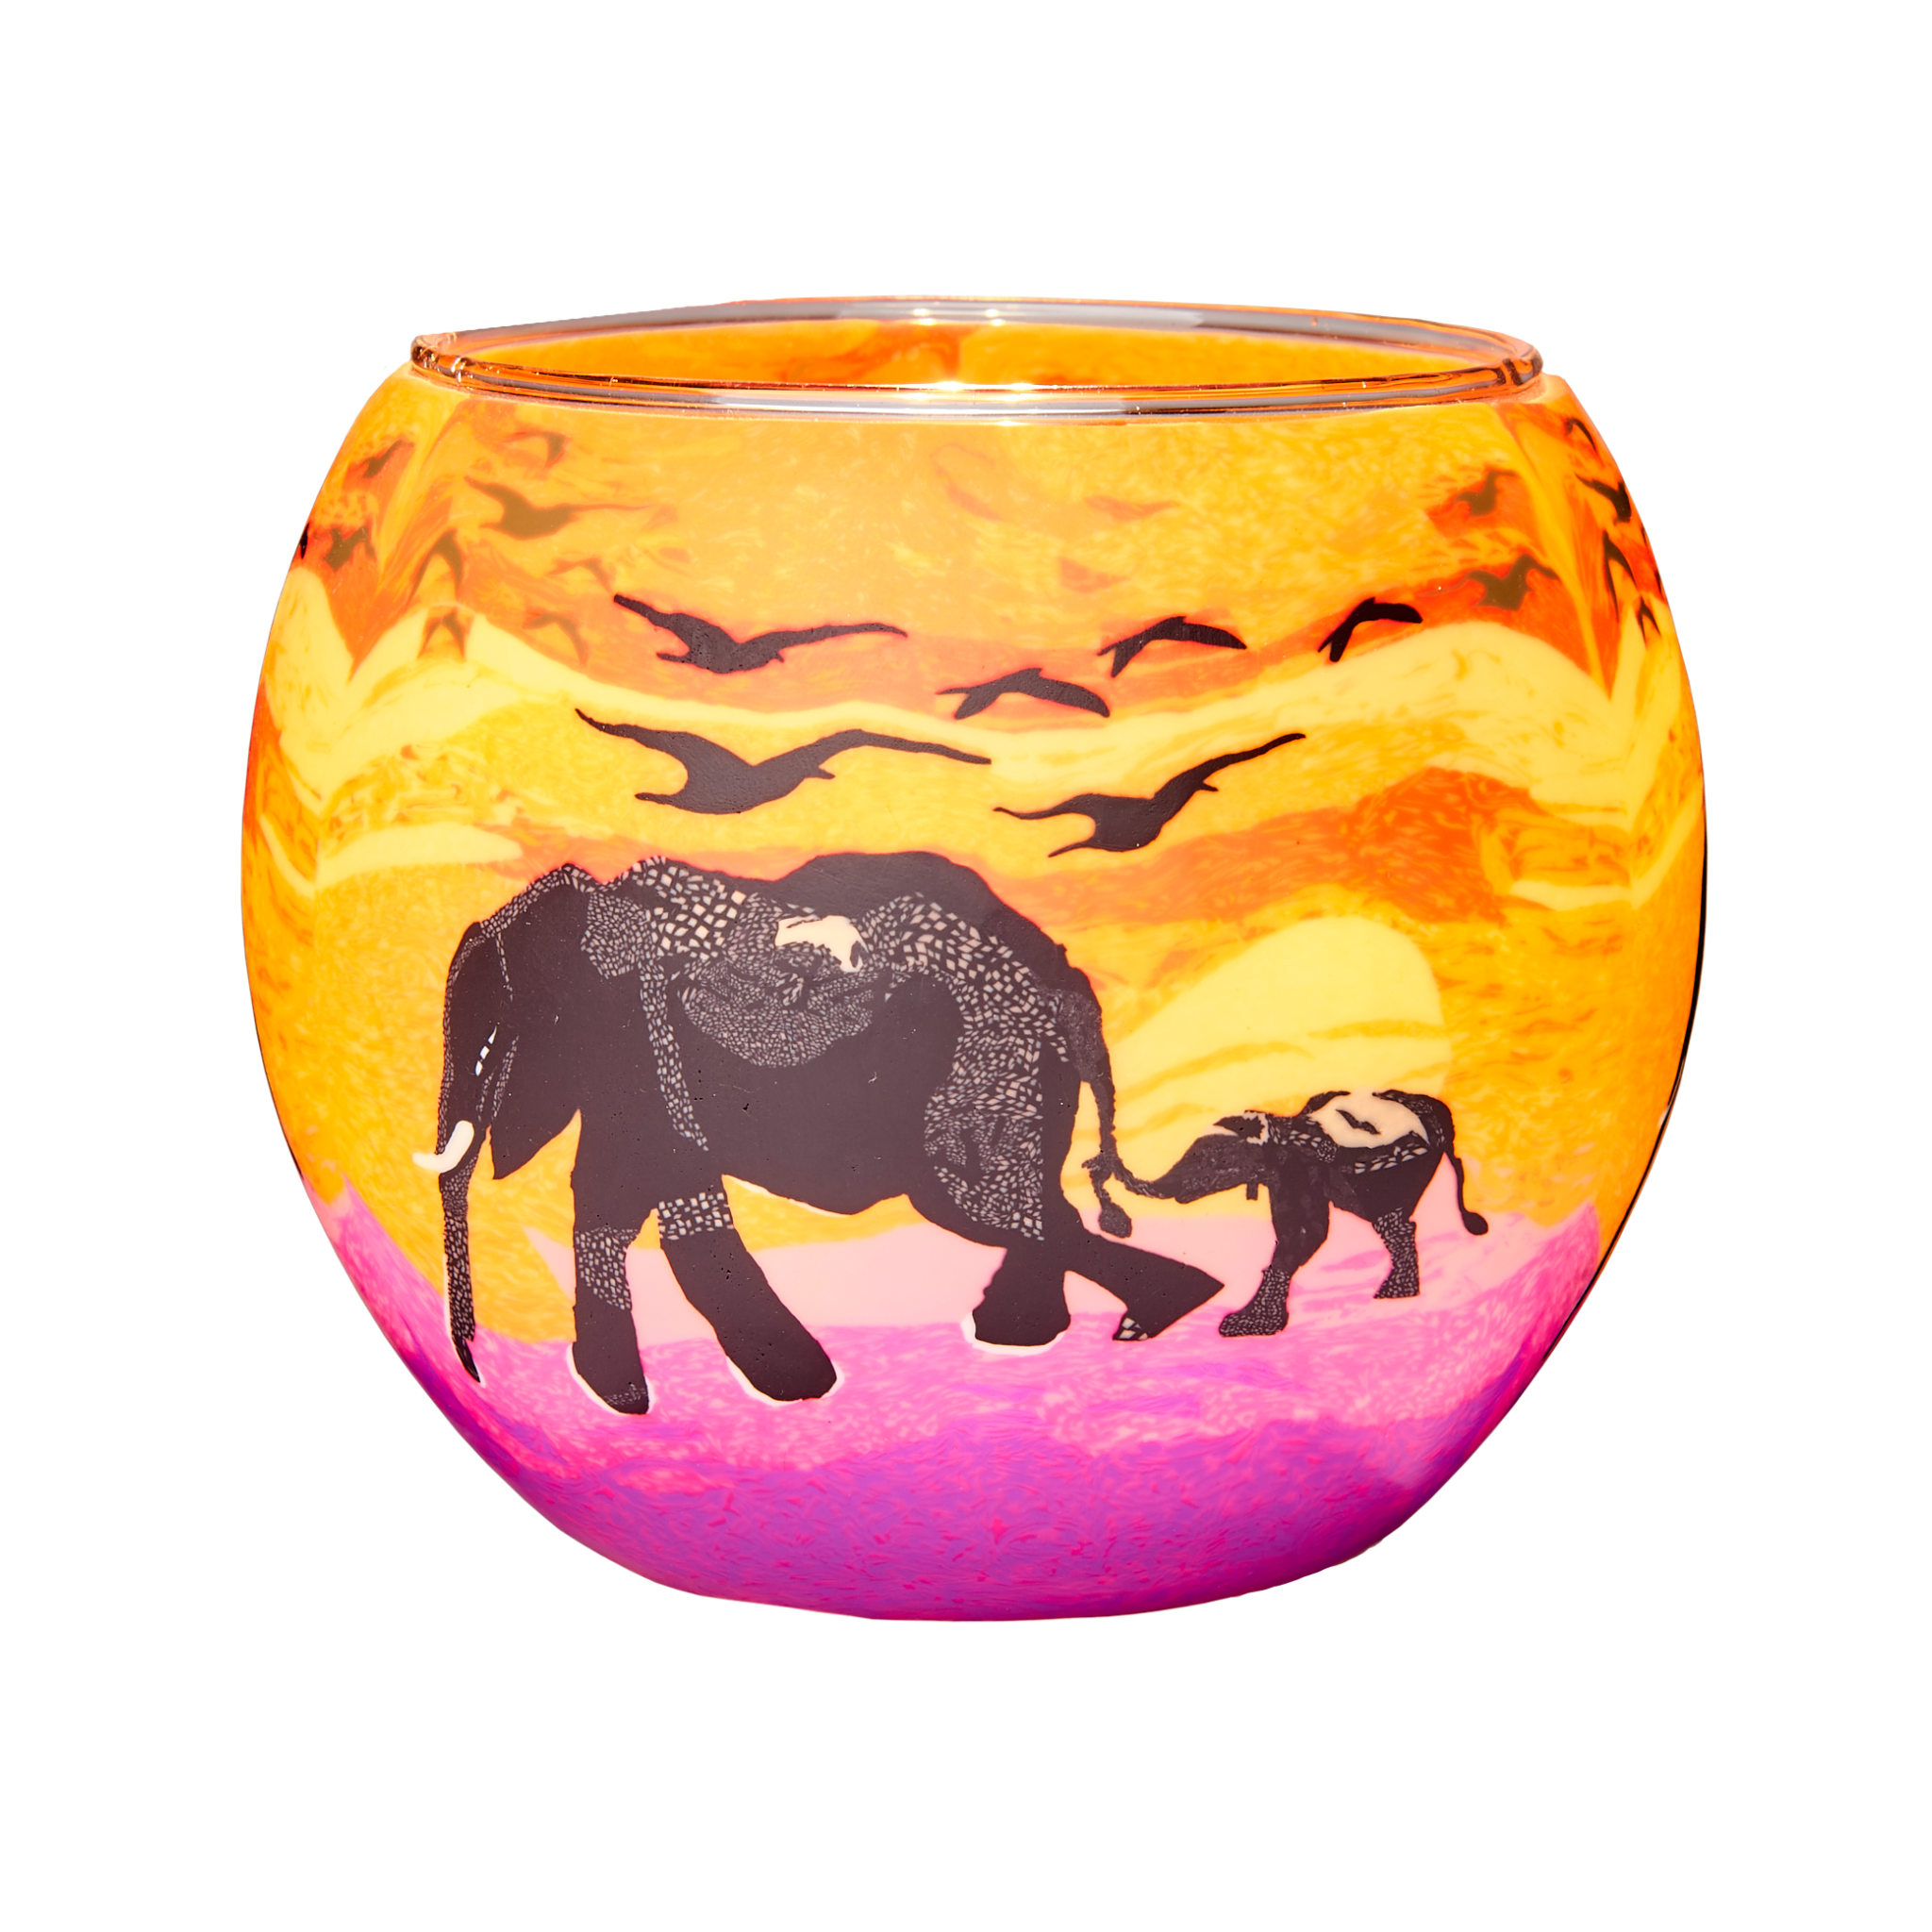 21102 Elephant and Baby, 11cm Glowing Glass, Pack of 6